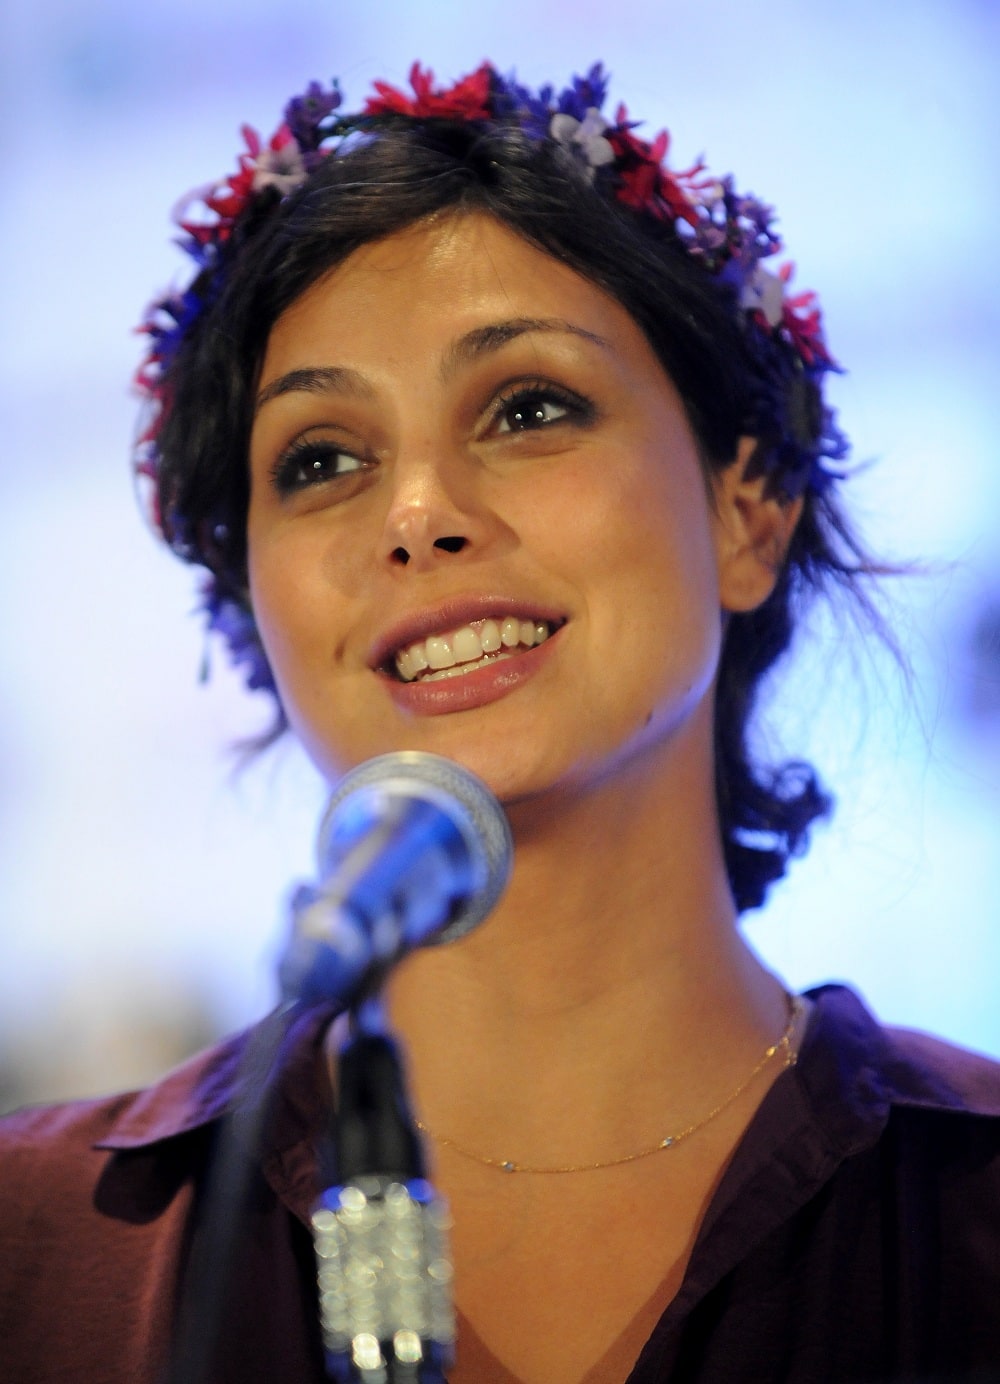 Picture of Morena Baccarin